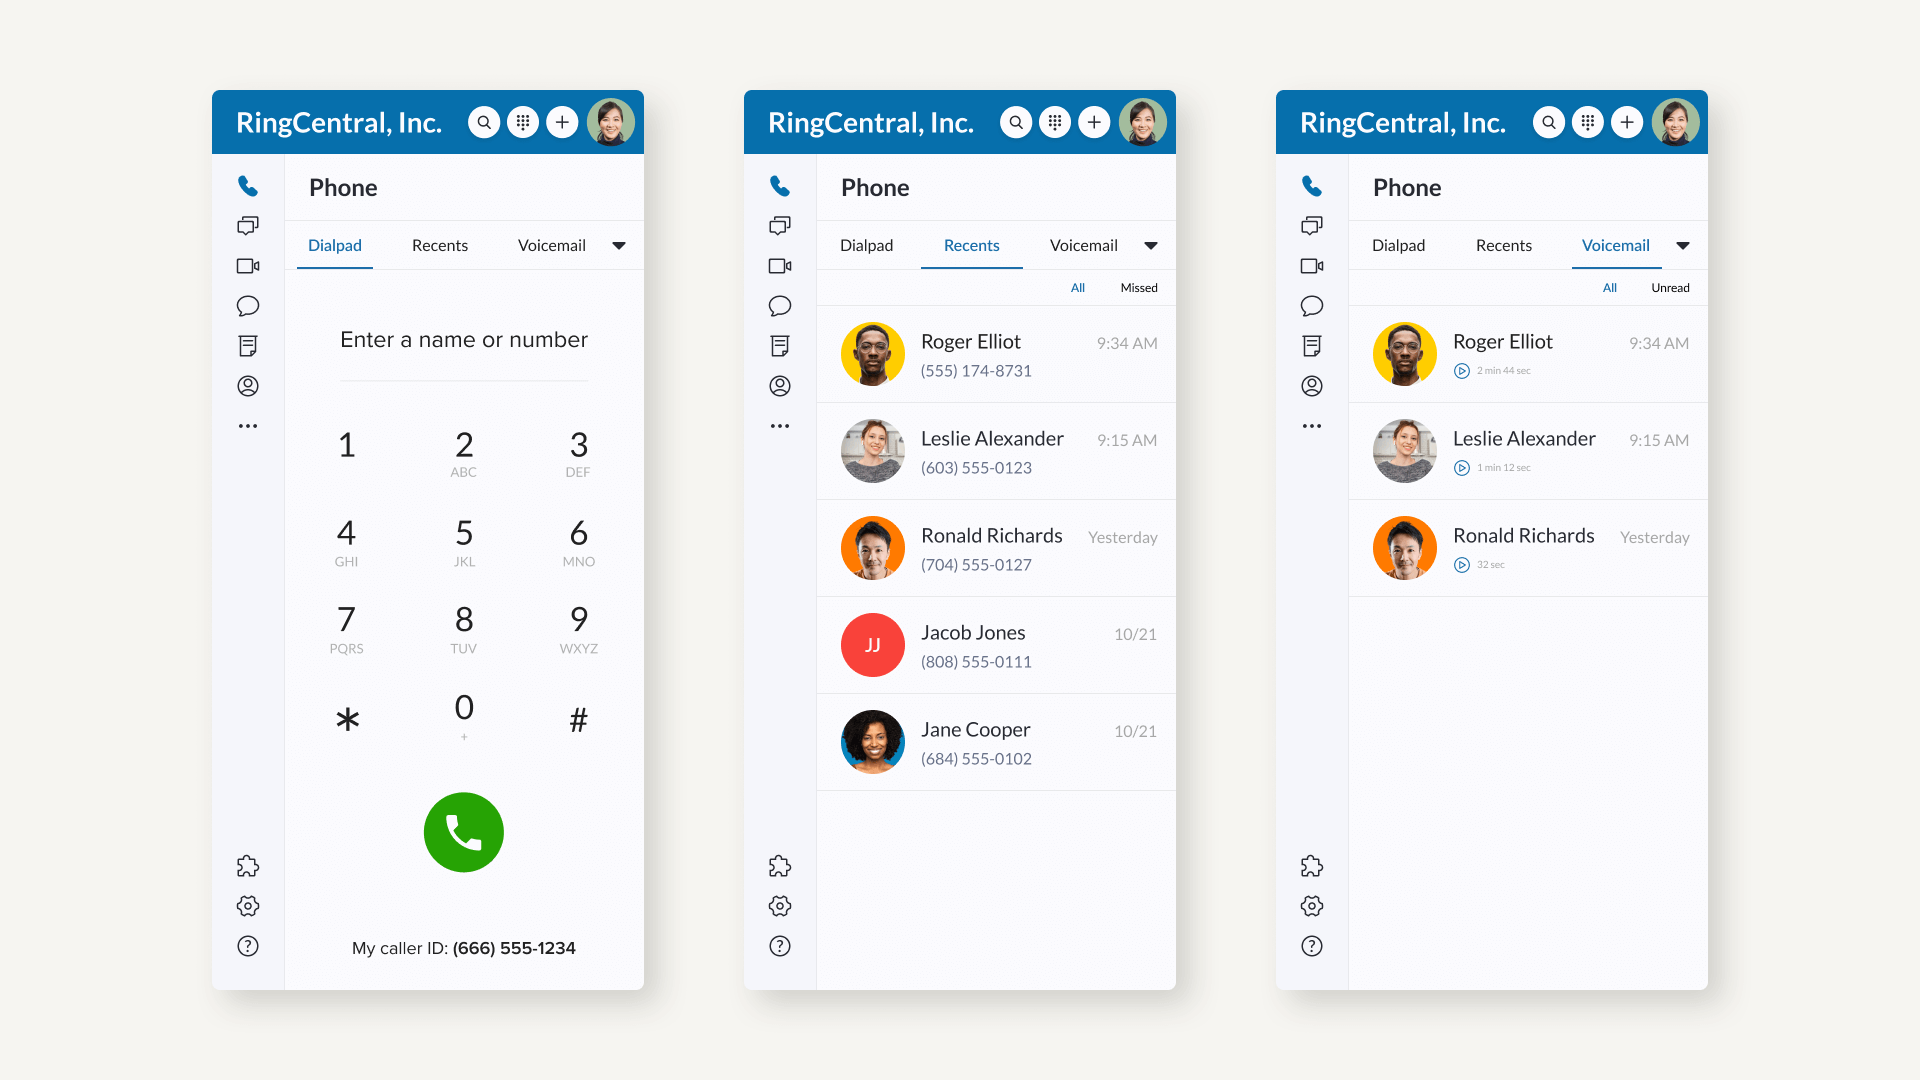 RingCentral softphone compact view